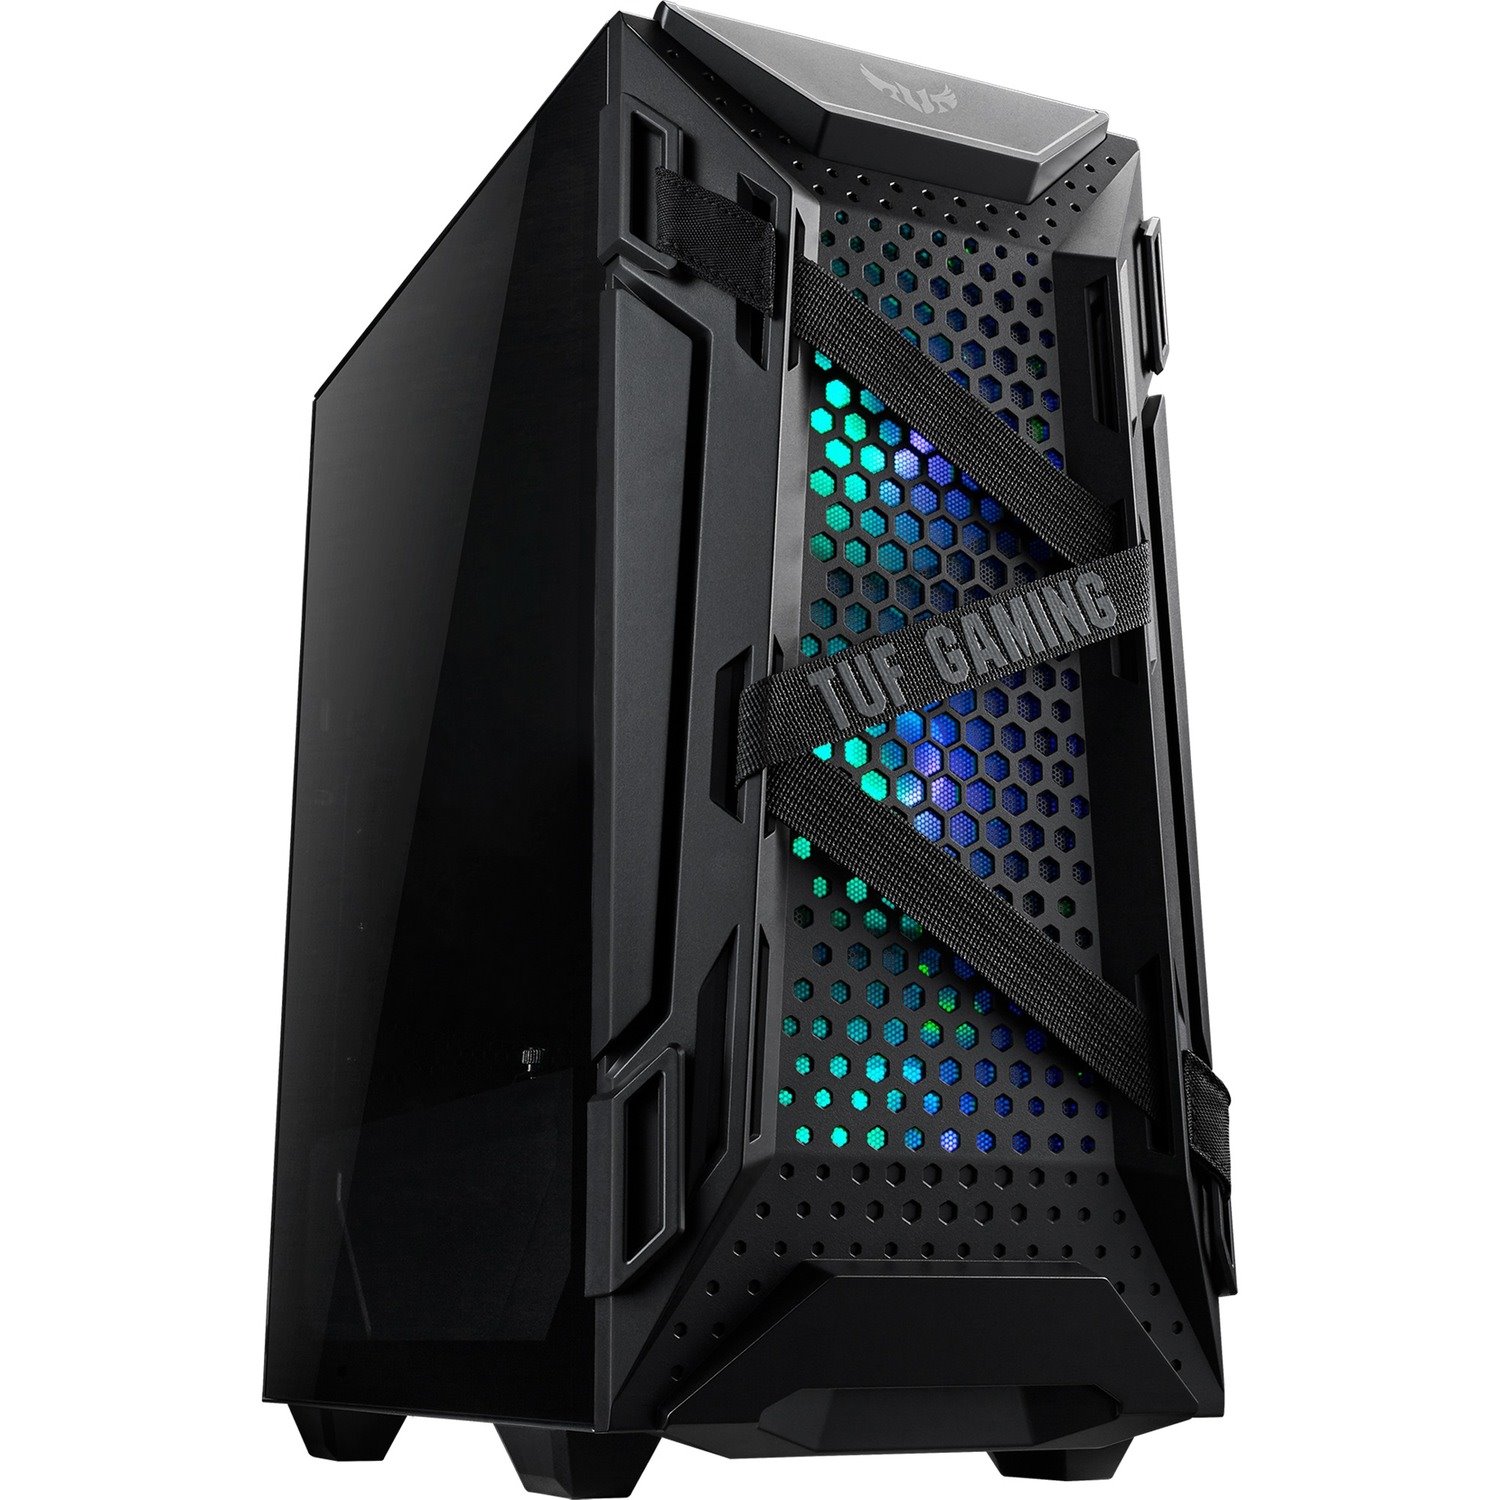 TUF Gaming Computer Case - ATX Motherboard Supported - Mid-tower - Tempered Glass - Black